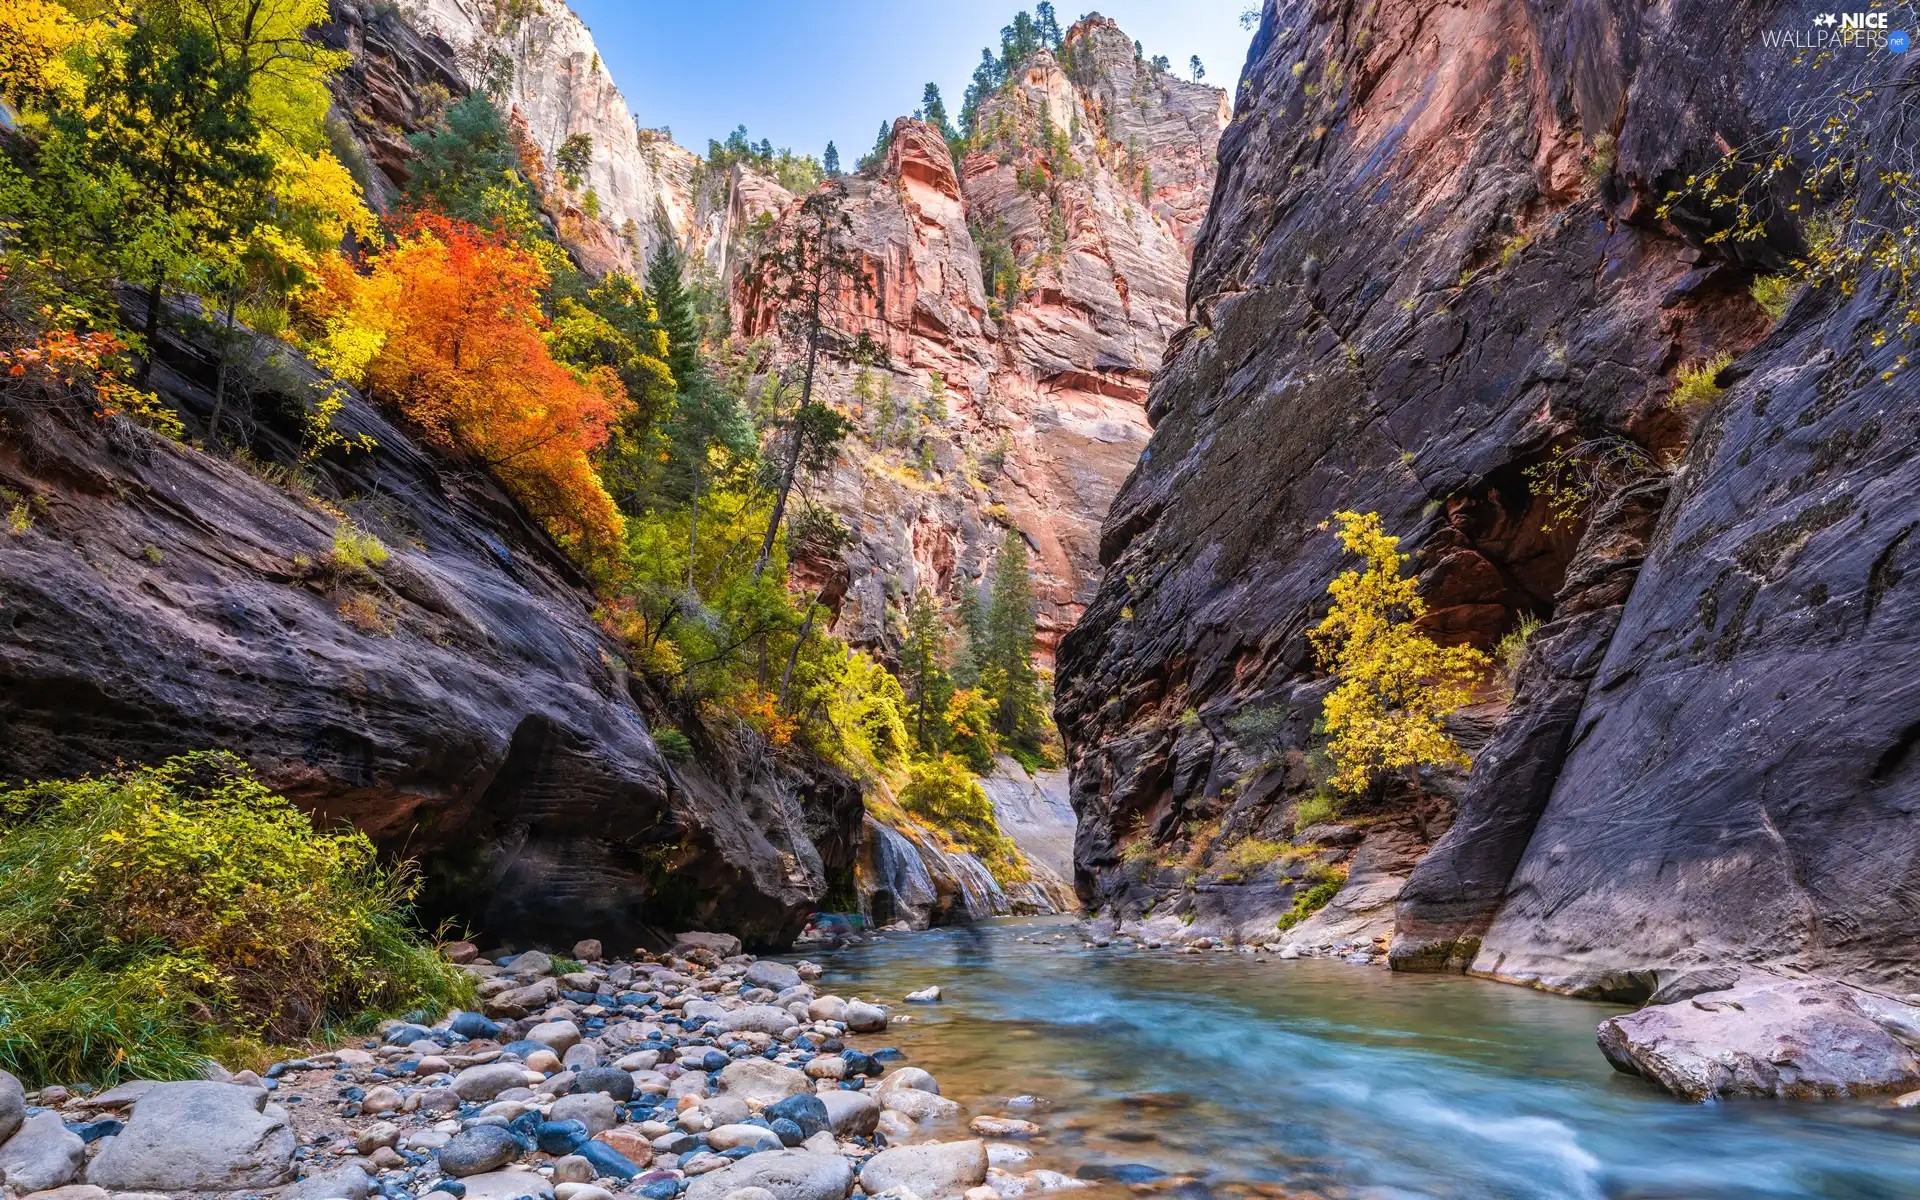 Zion Narrows Canyon, Utah State, VEGETATION, Zion National Park, The United States, rocks, Virgin River